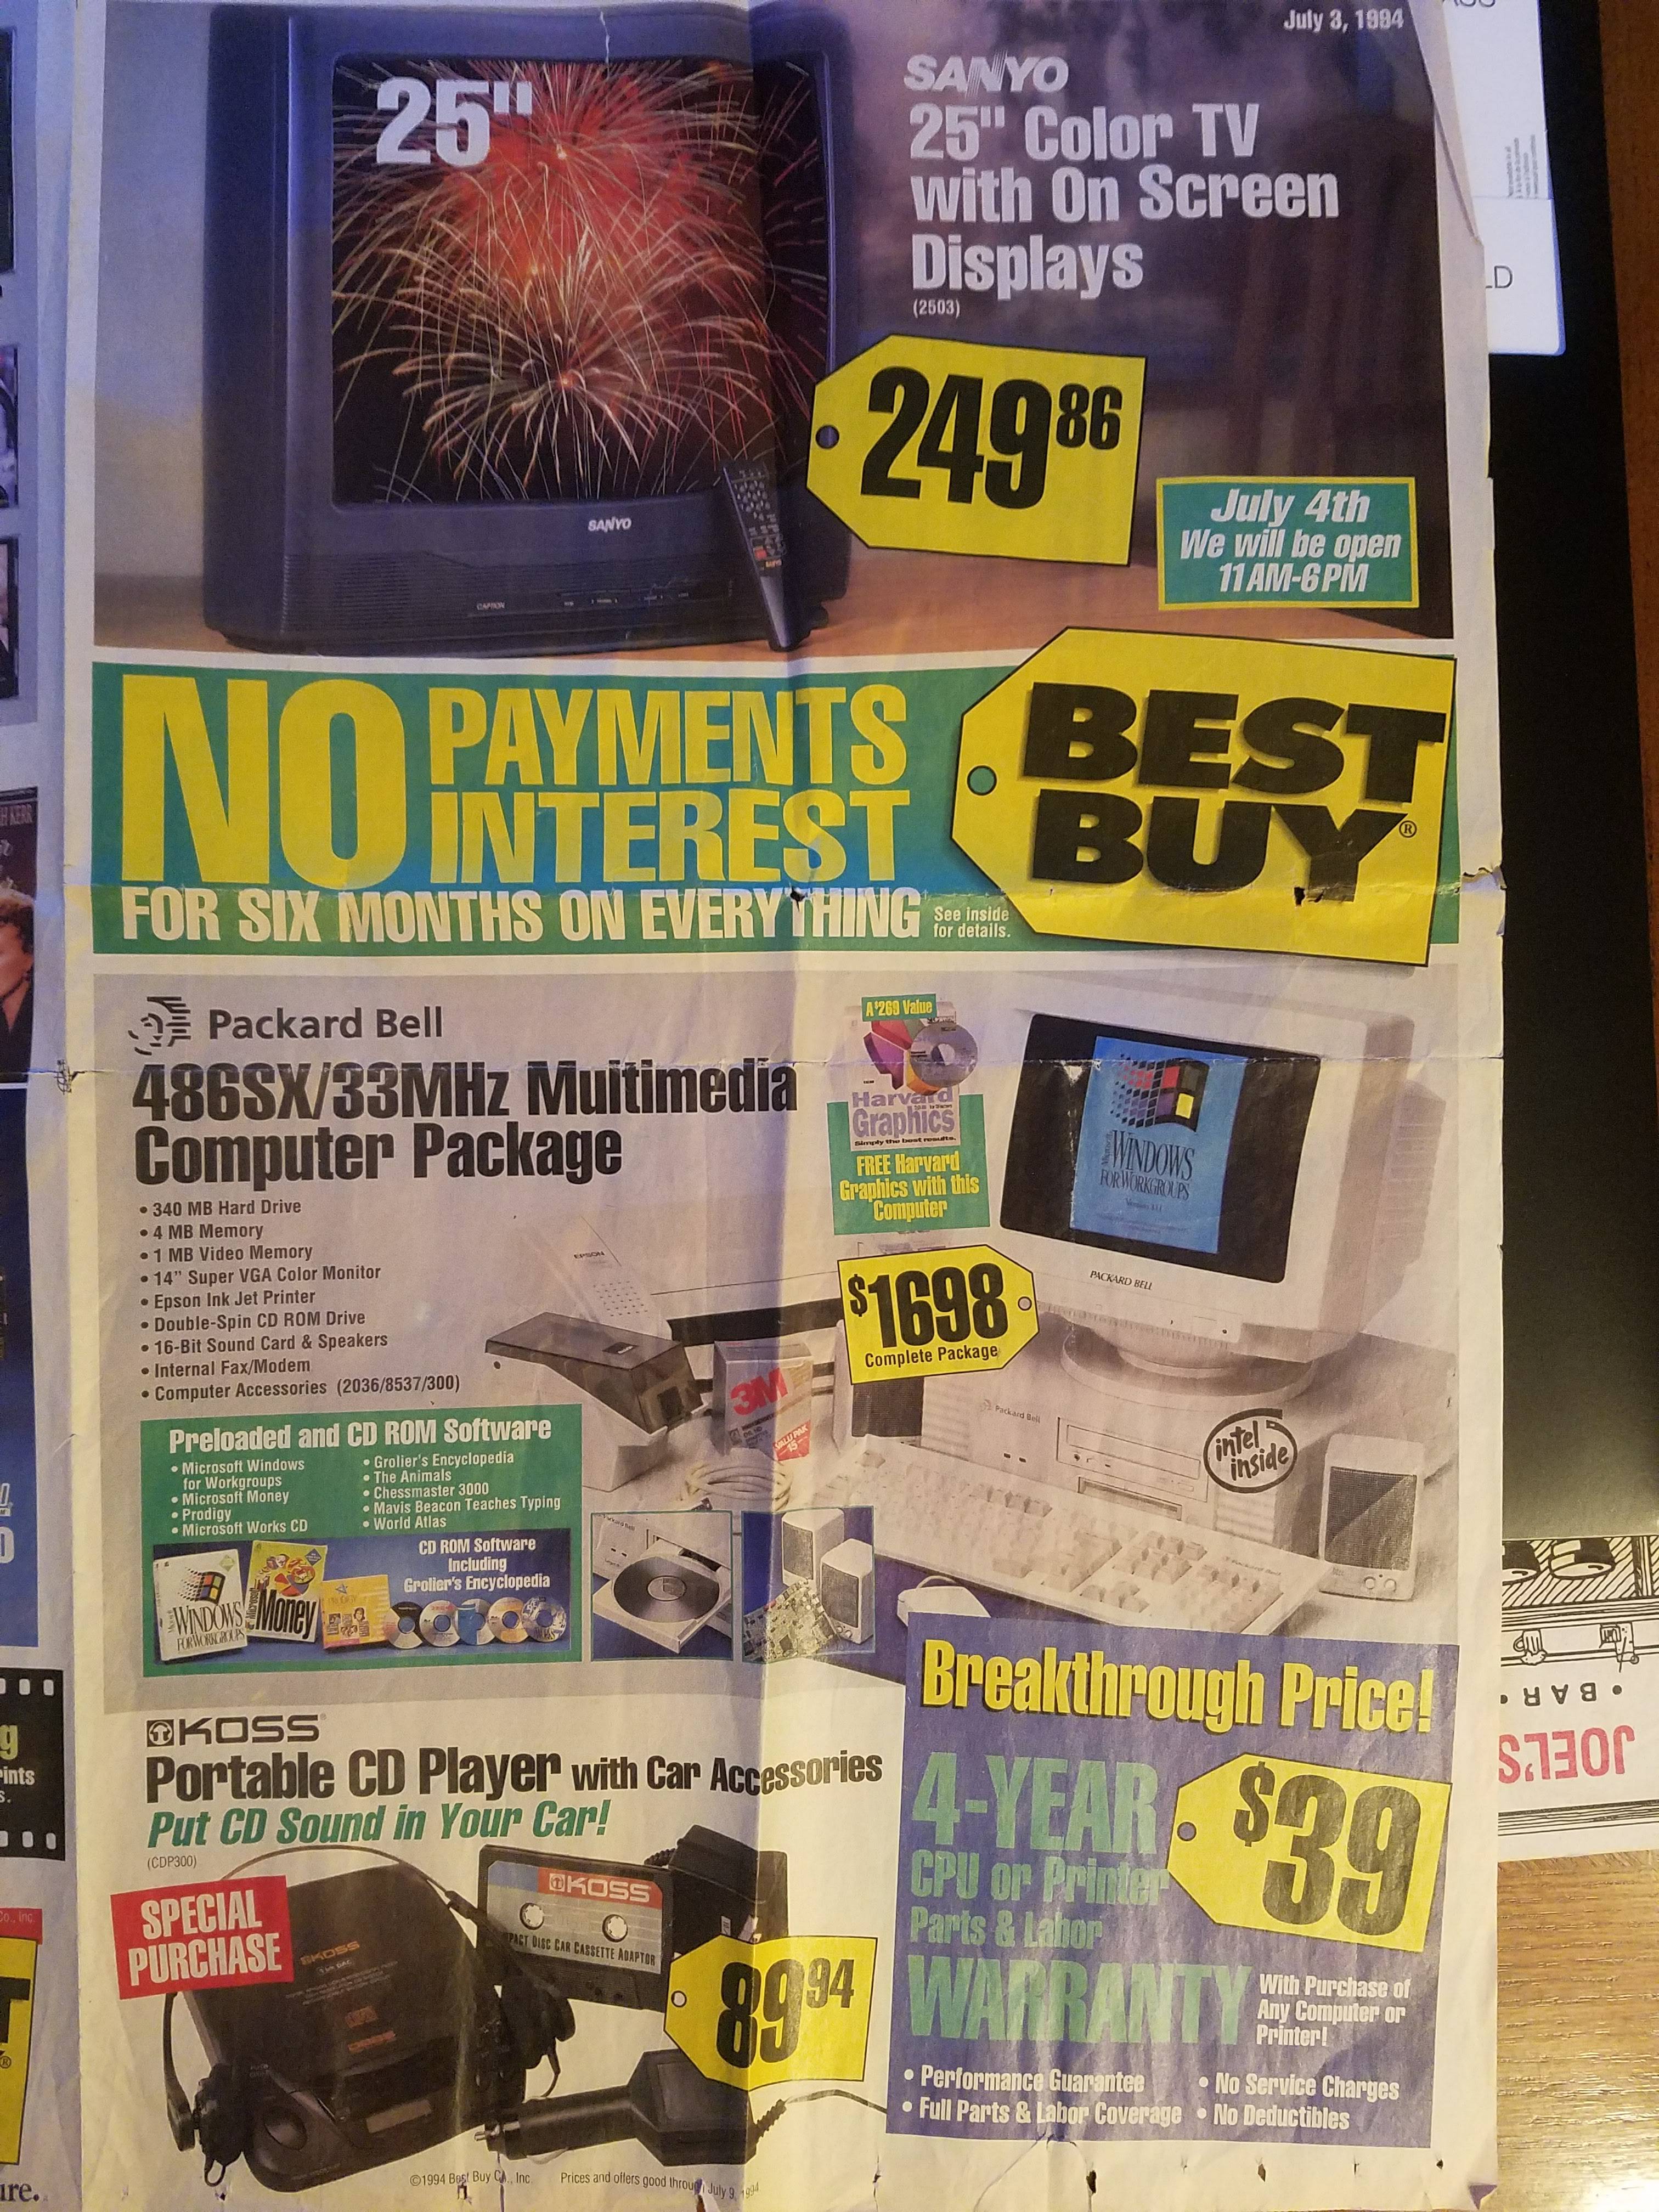 old best buy ad - 1300 Sanyo 25